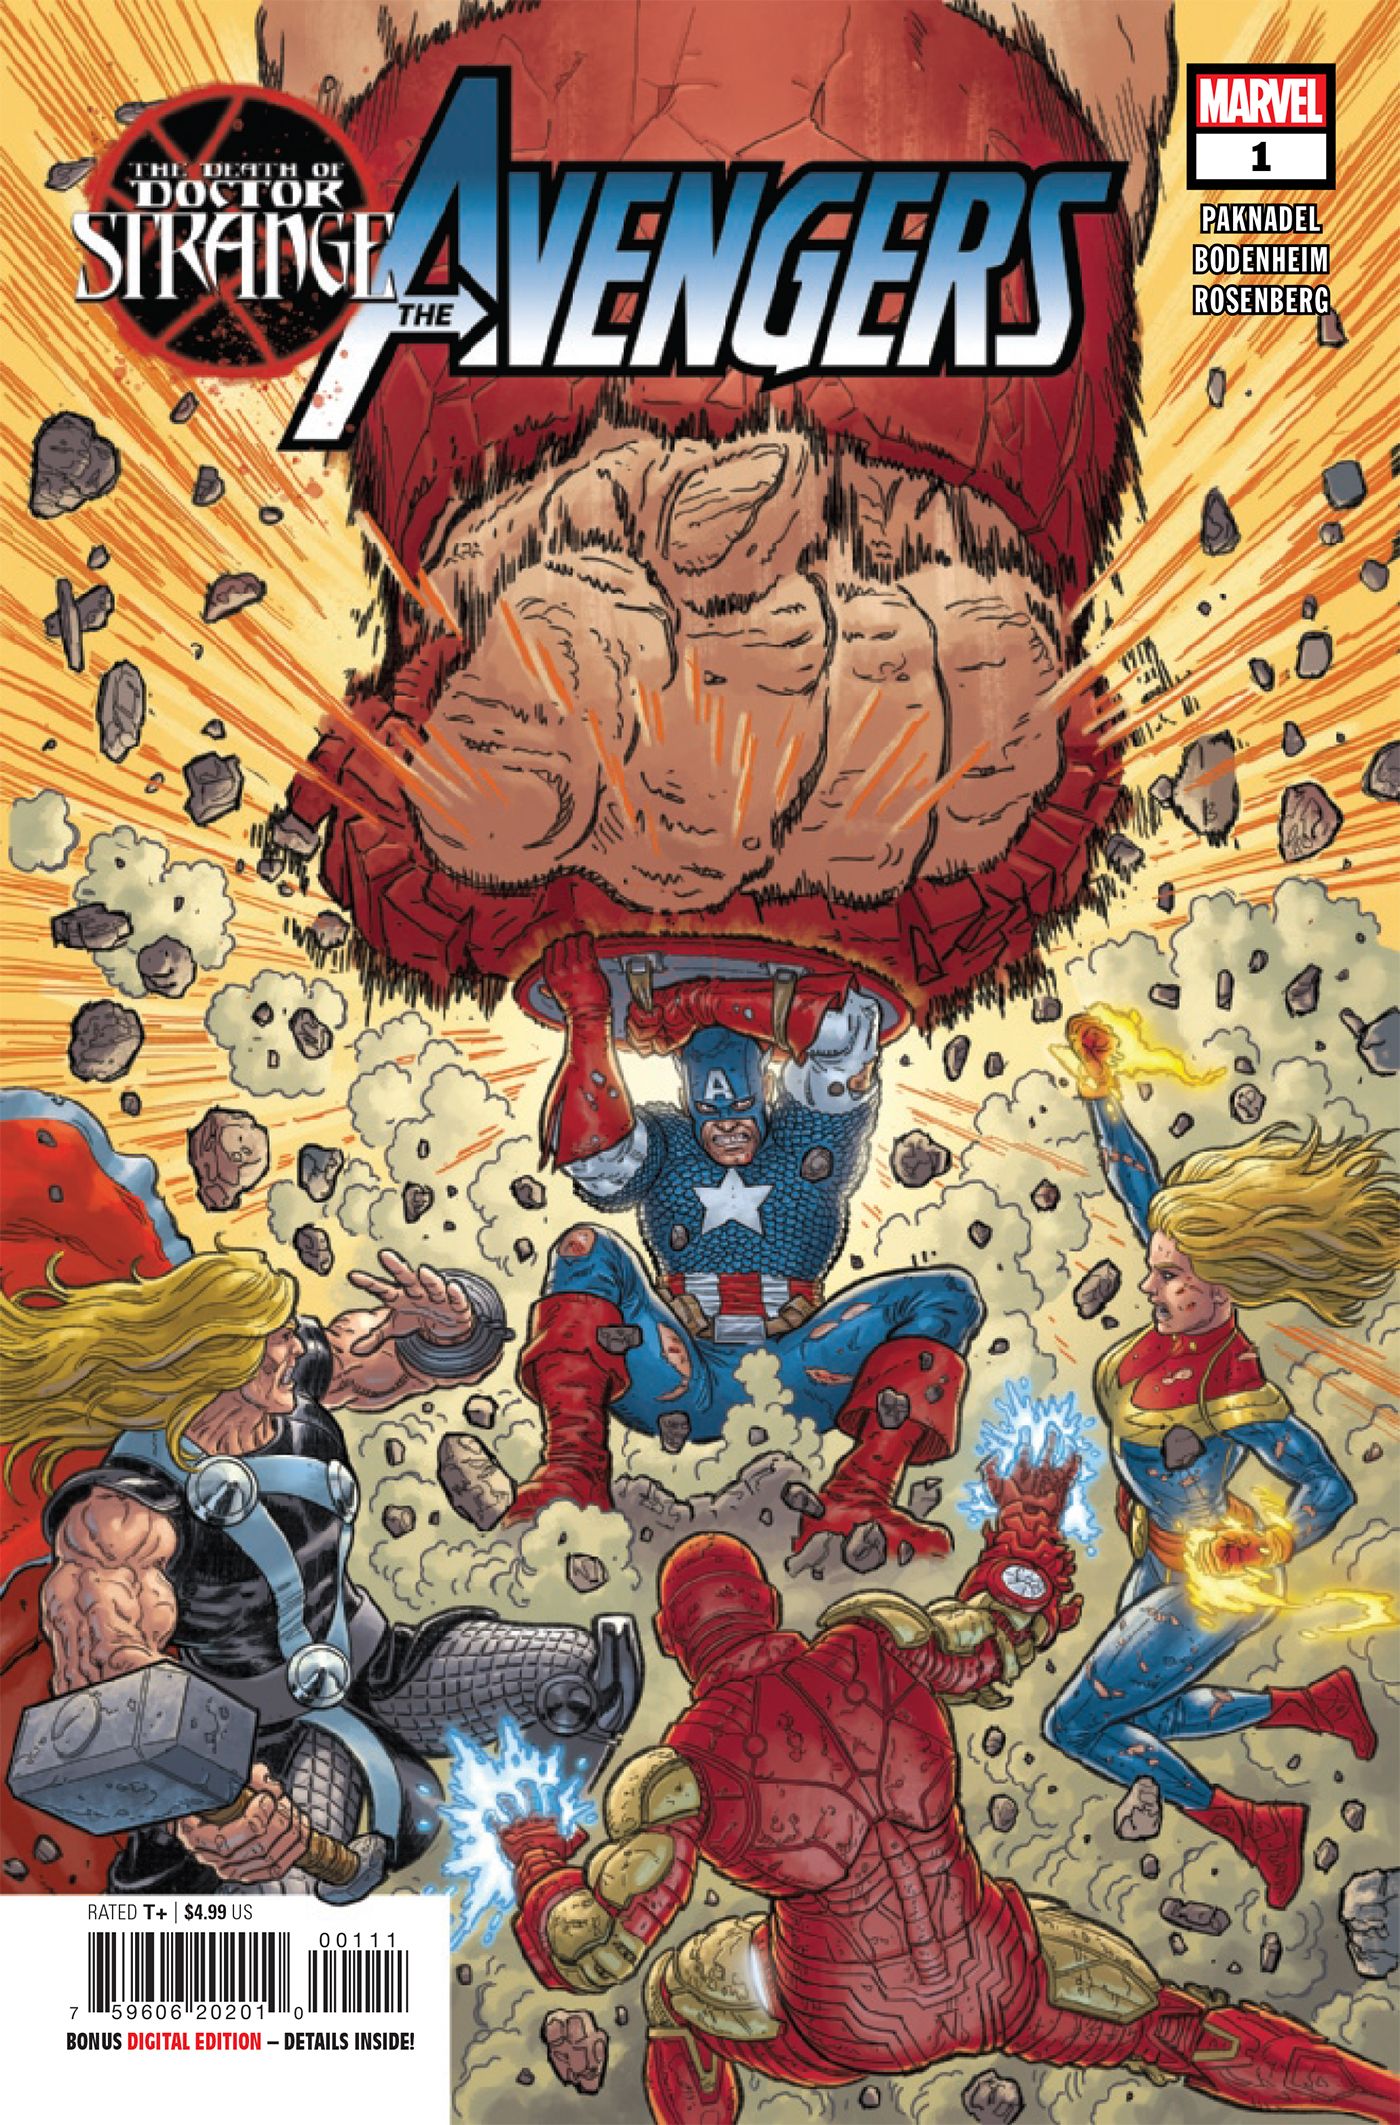 The cover for The Death of Doctor Strange: Avengers shows Juggernaut punching Captain America's shield.